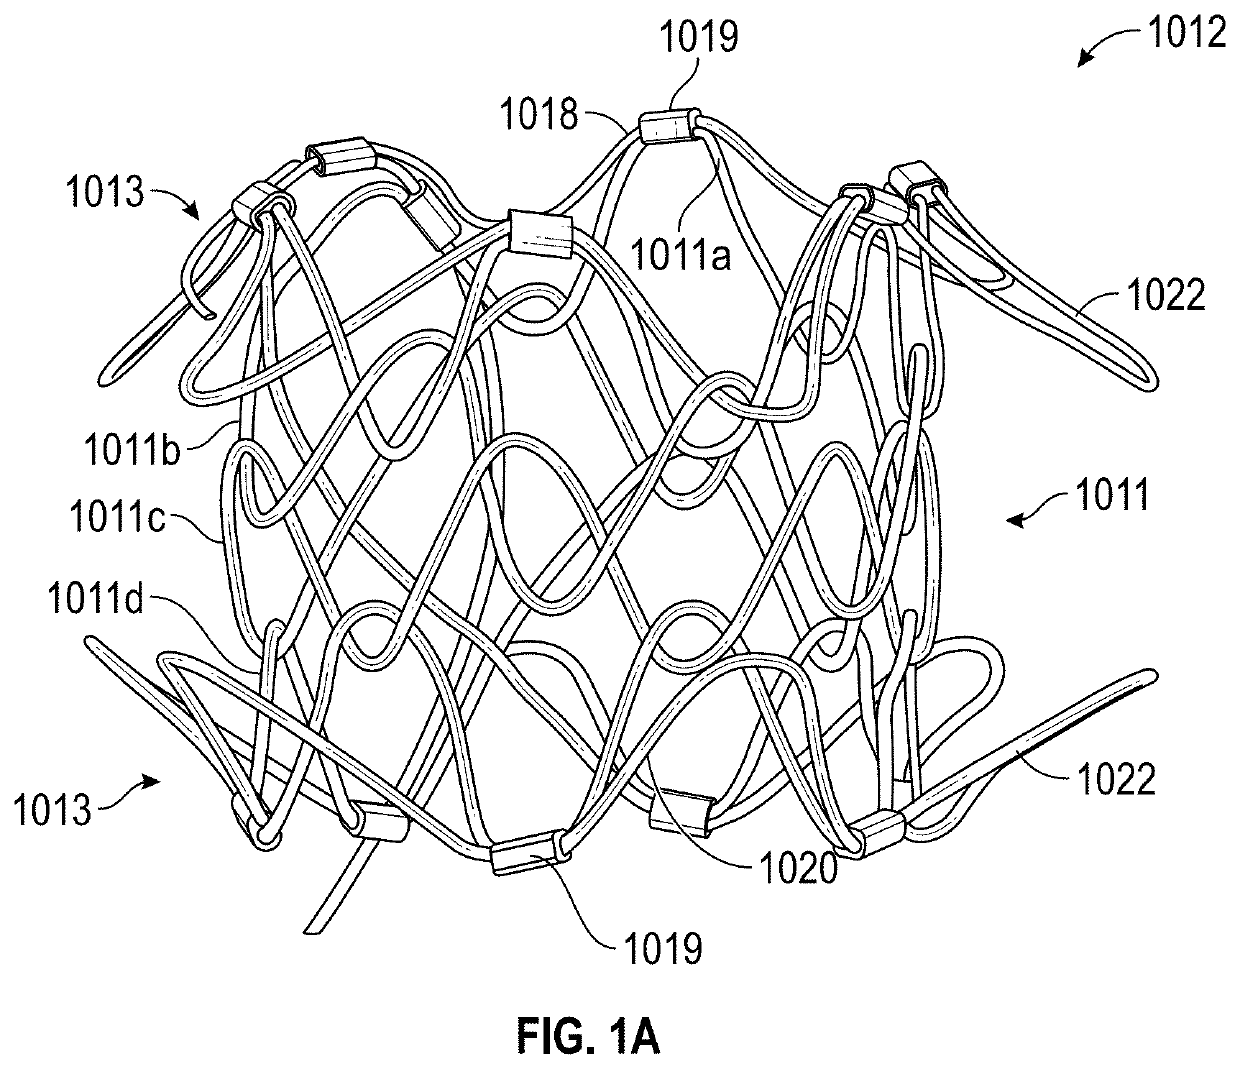 Percutaneous Potts Shunt Devices and Related Methods